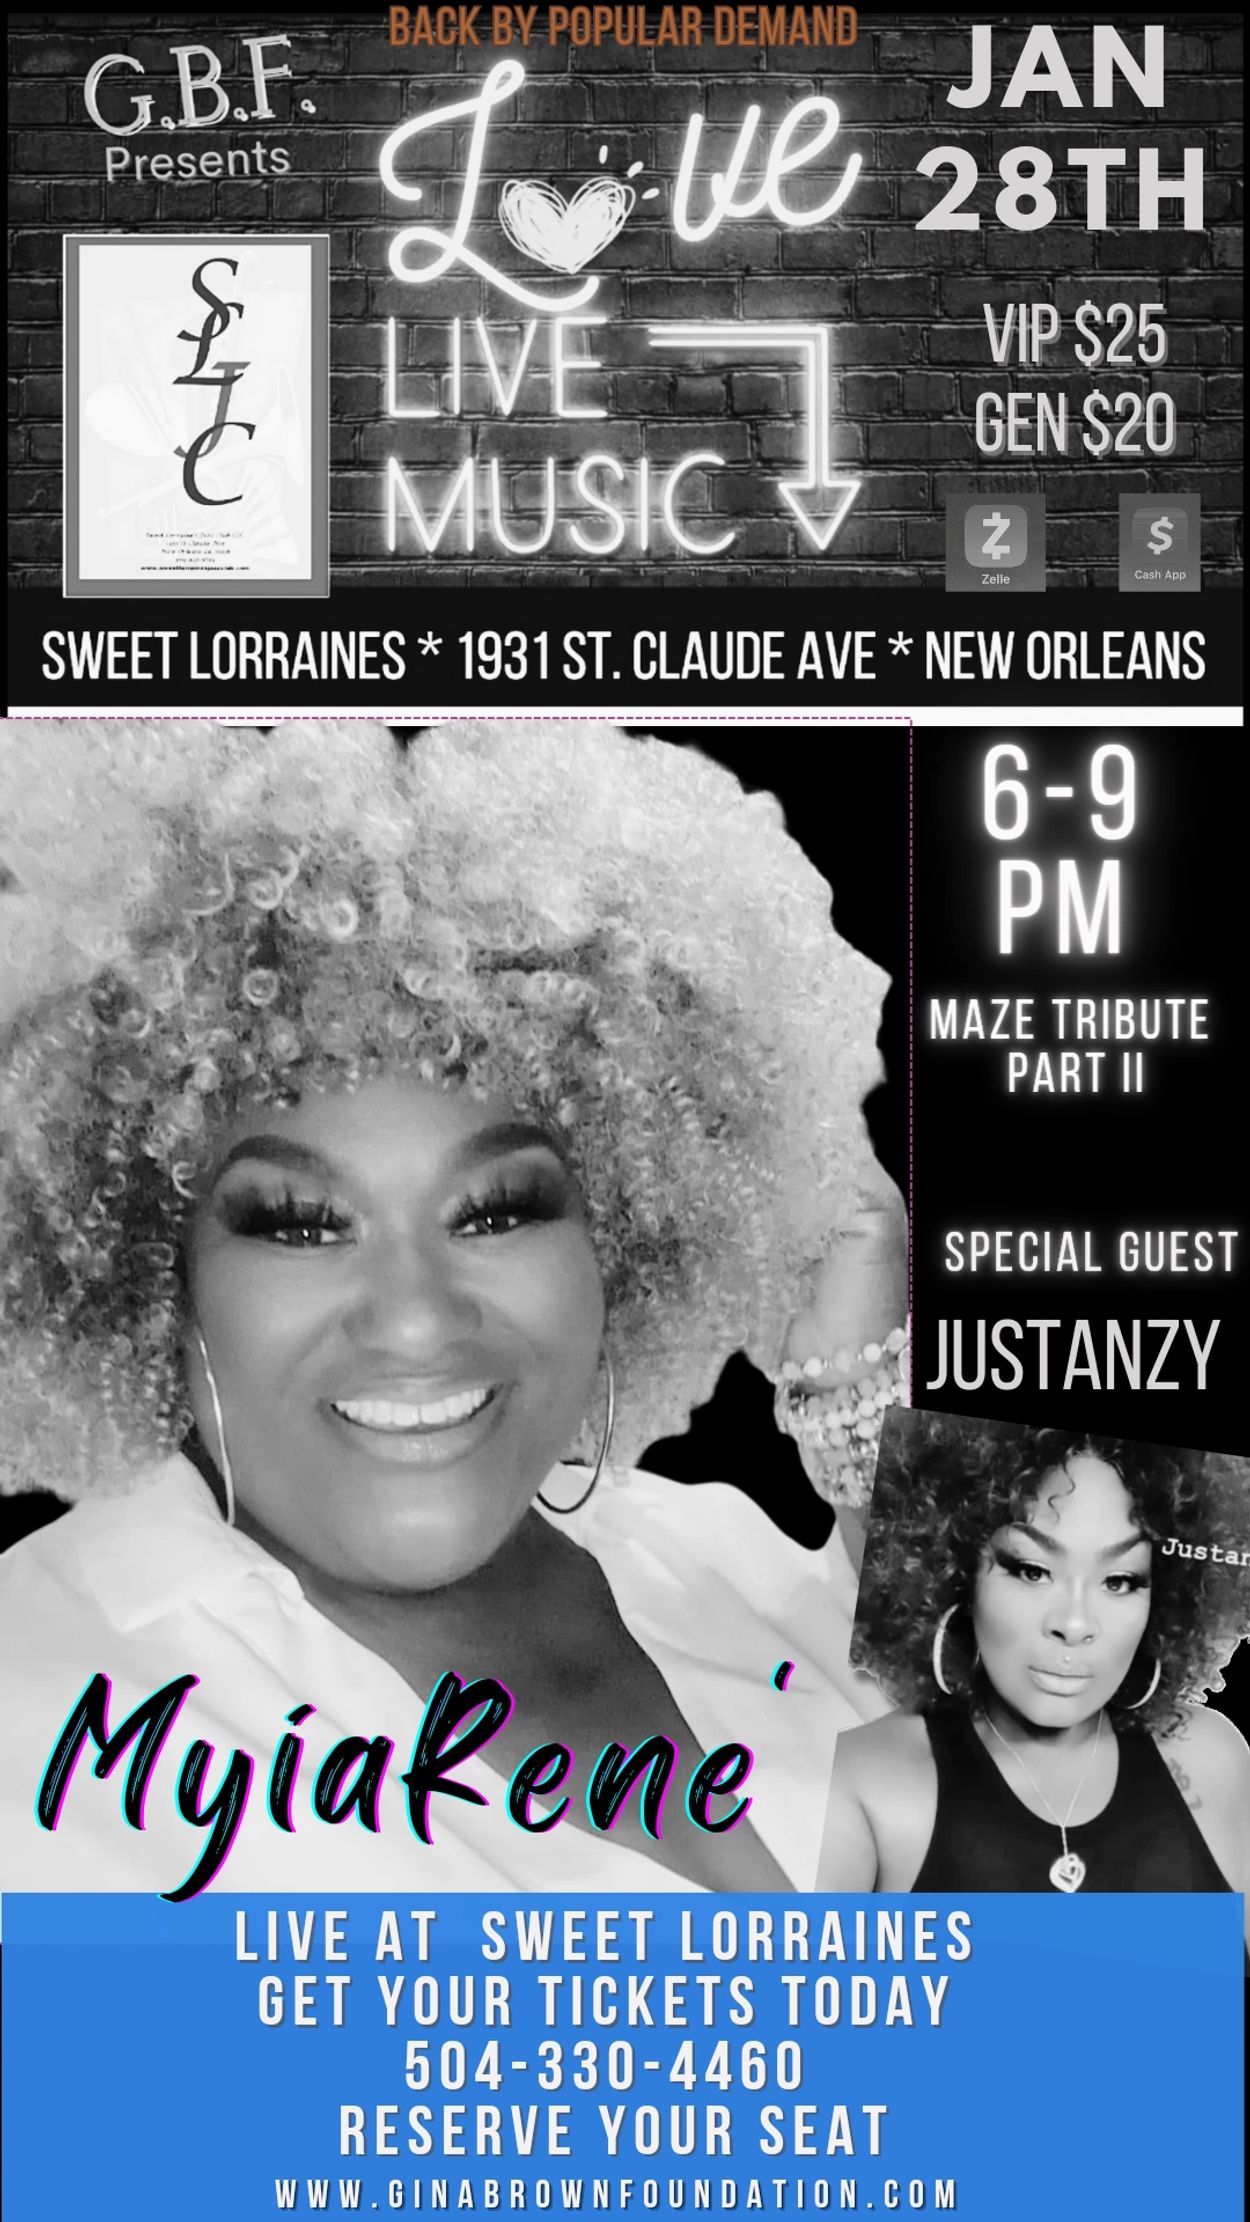 Maze Tribute II presented by MyiaRene' featuring JusTanzy is guaranteed to bring Happy Feelings. Cal